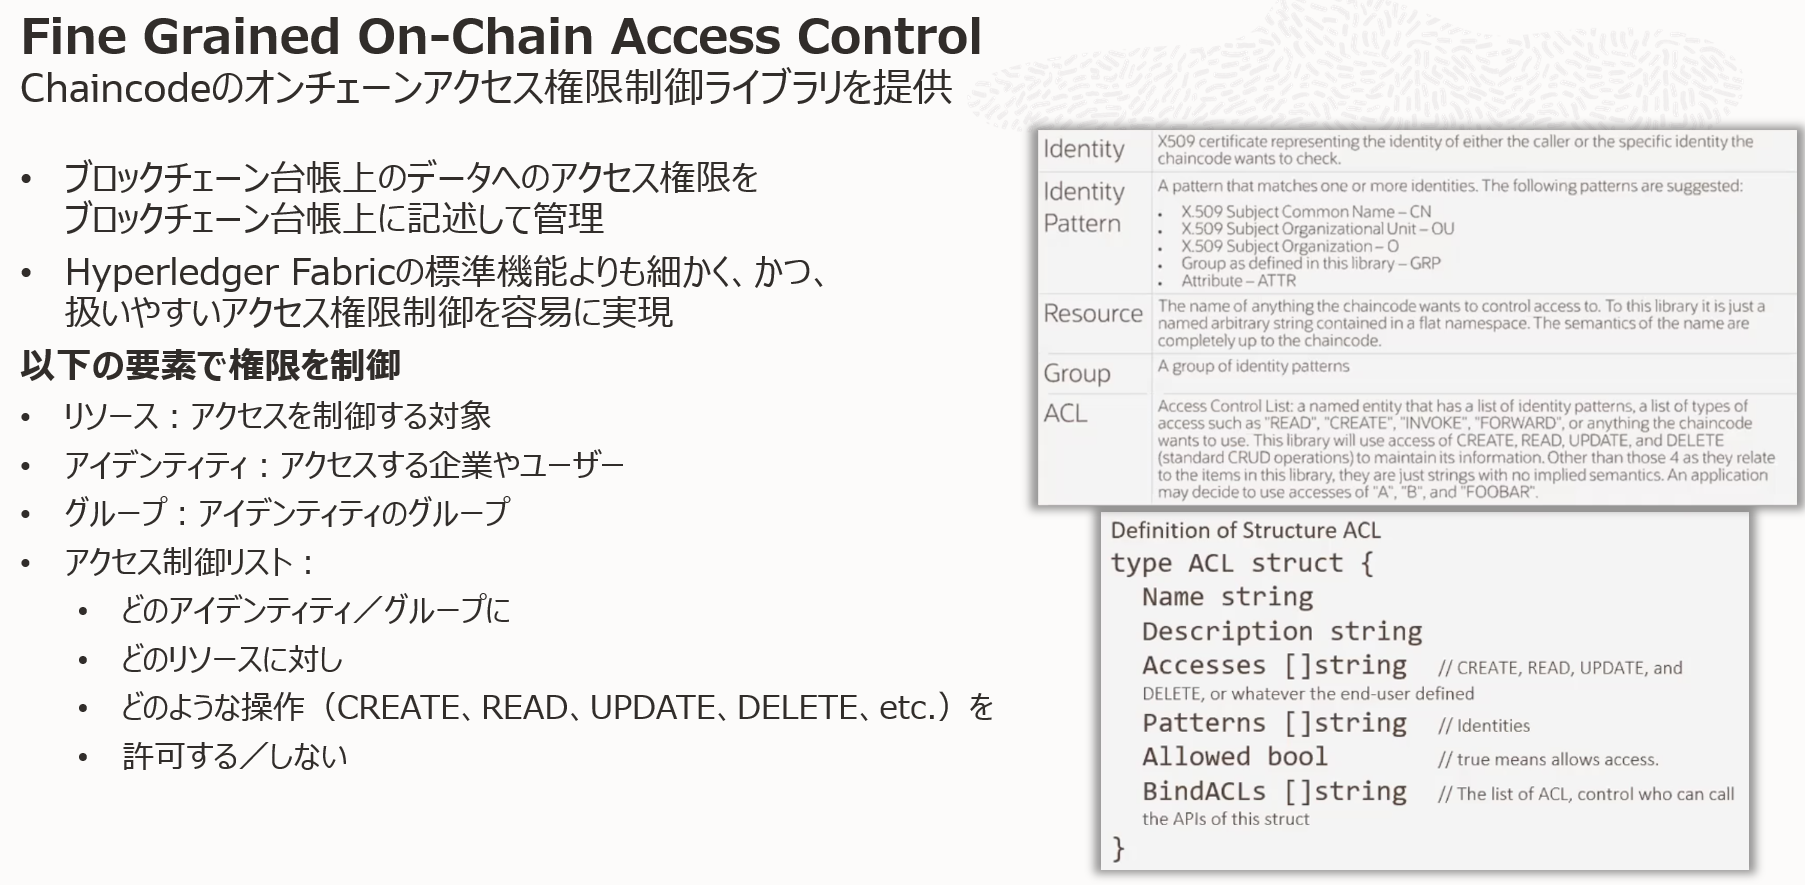 Fine-Grained Access Control Library紹介スライド